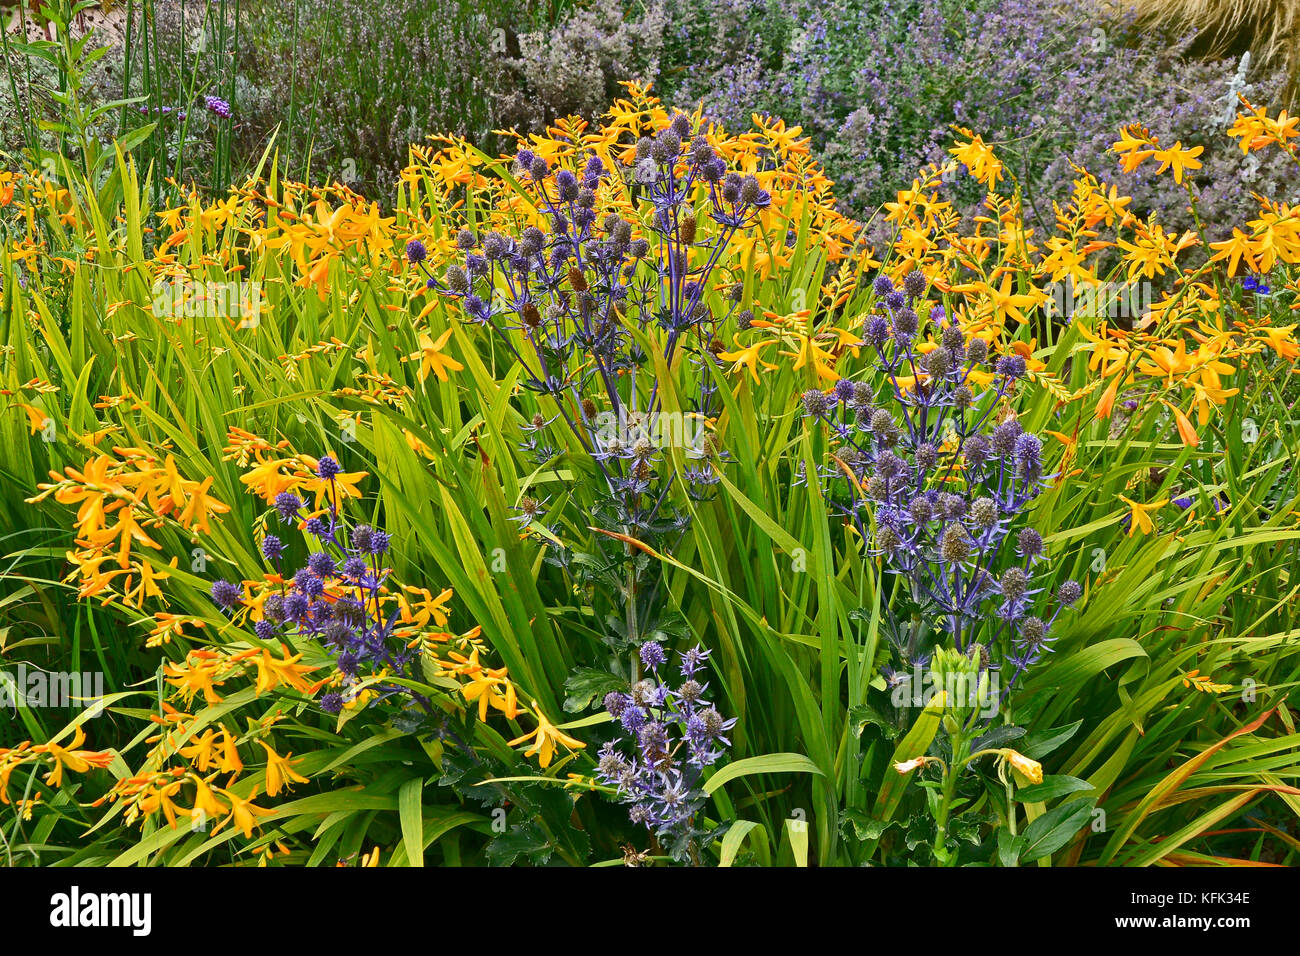 Garden flower border with Crocosmia and Eryngium making a colourful display Stock Photo